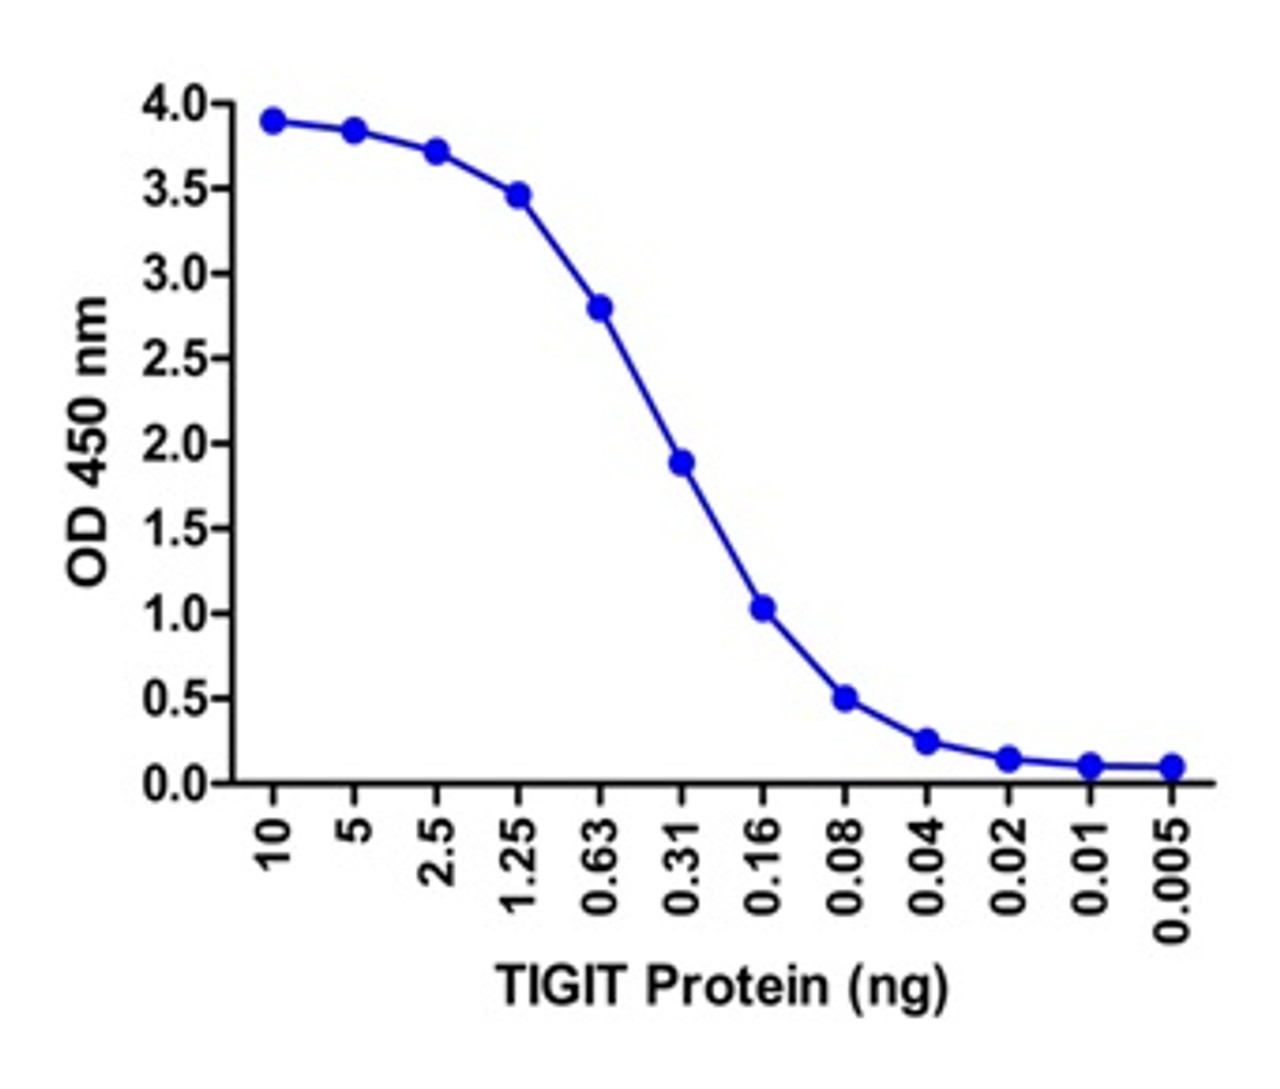 A sandwich ELISA was performed using the anti-TIGIT mAb RF16055 (5 &#956;g/ml) as the capture antibody. Biotin-labeled anti-TIGIT mAb RF16058-biotin (1 &#956;g/ml) and streptavidin-HRP (0.1 &#956;g/ml) were used for detection. Detection range is from 10 ng to 40 pg.